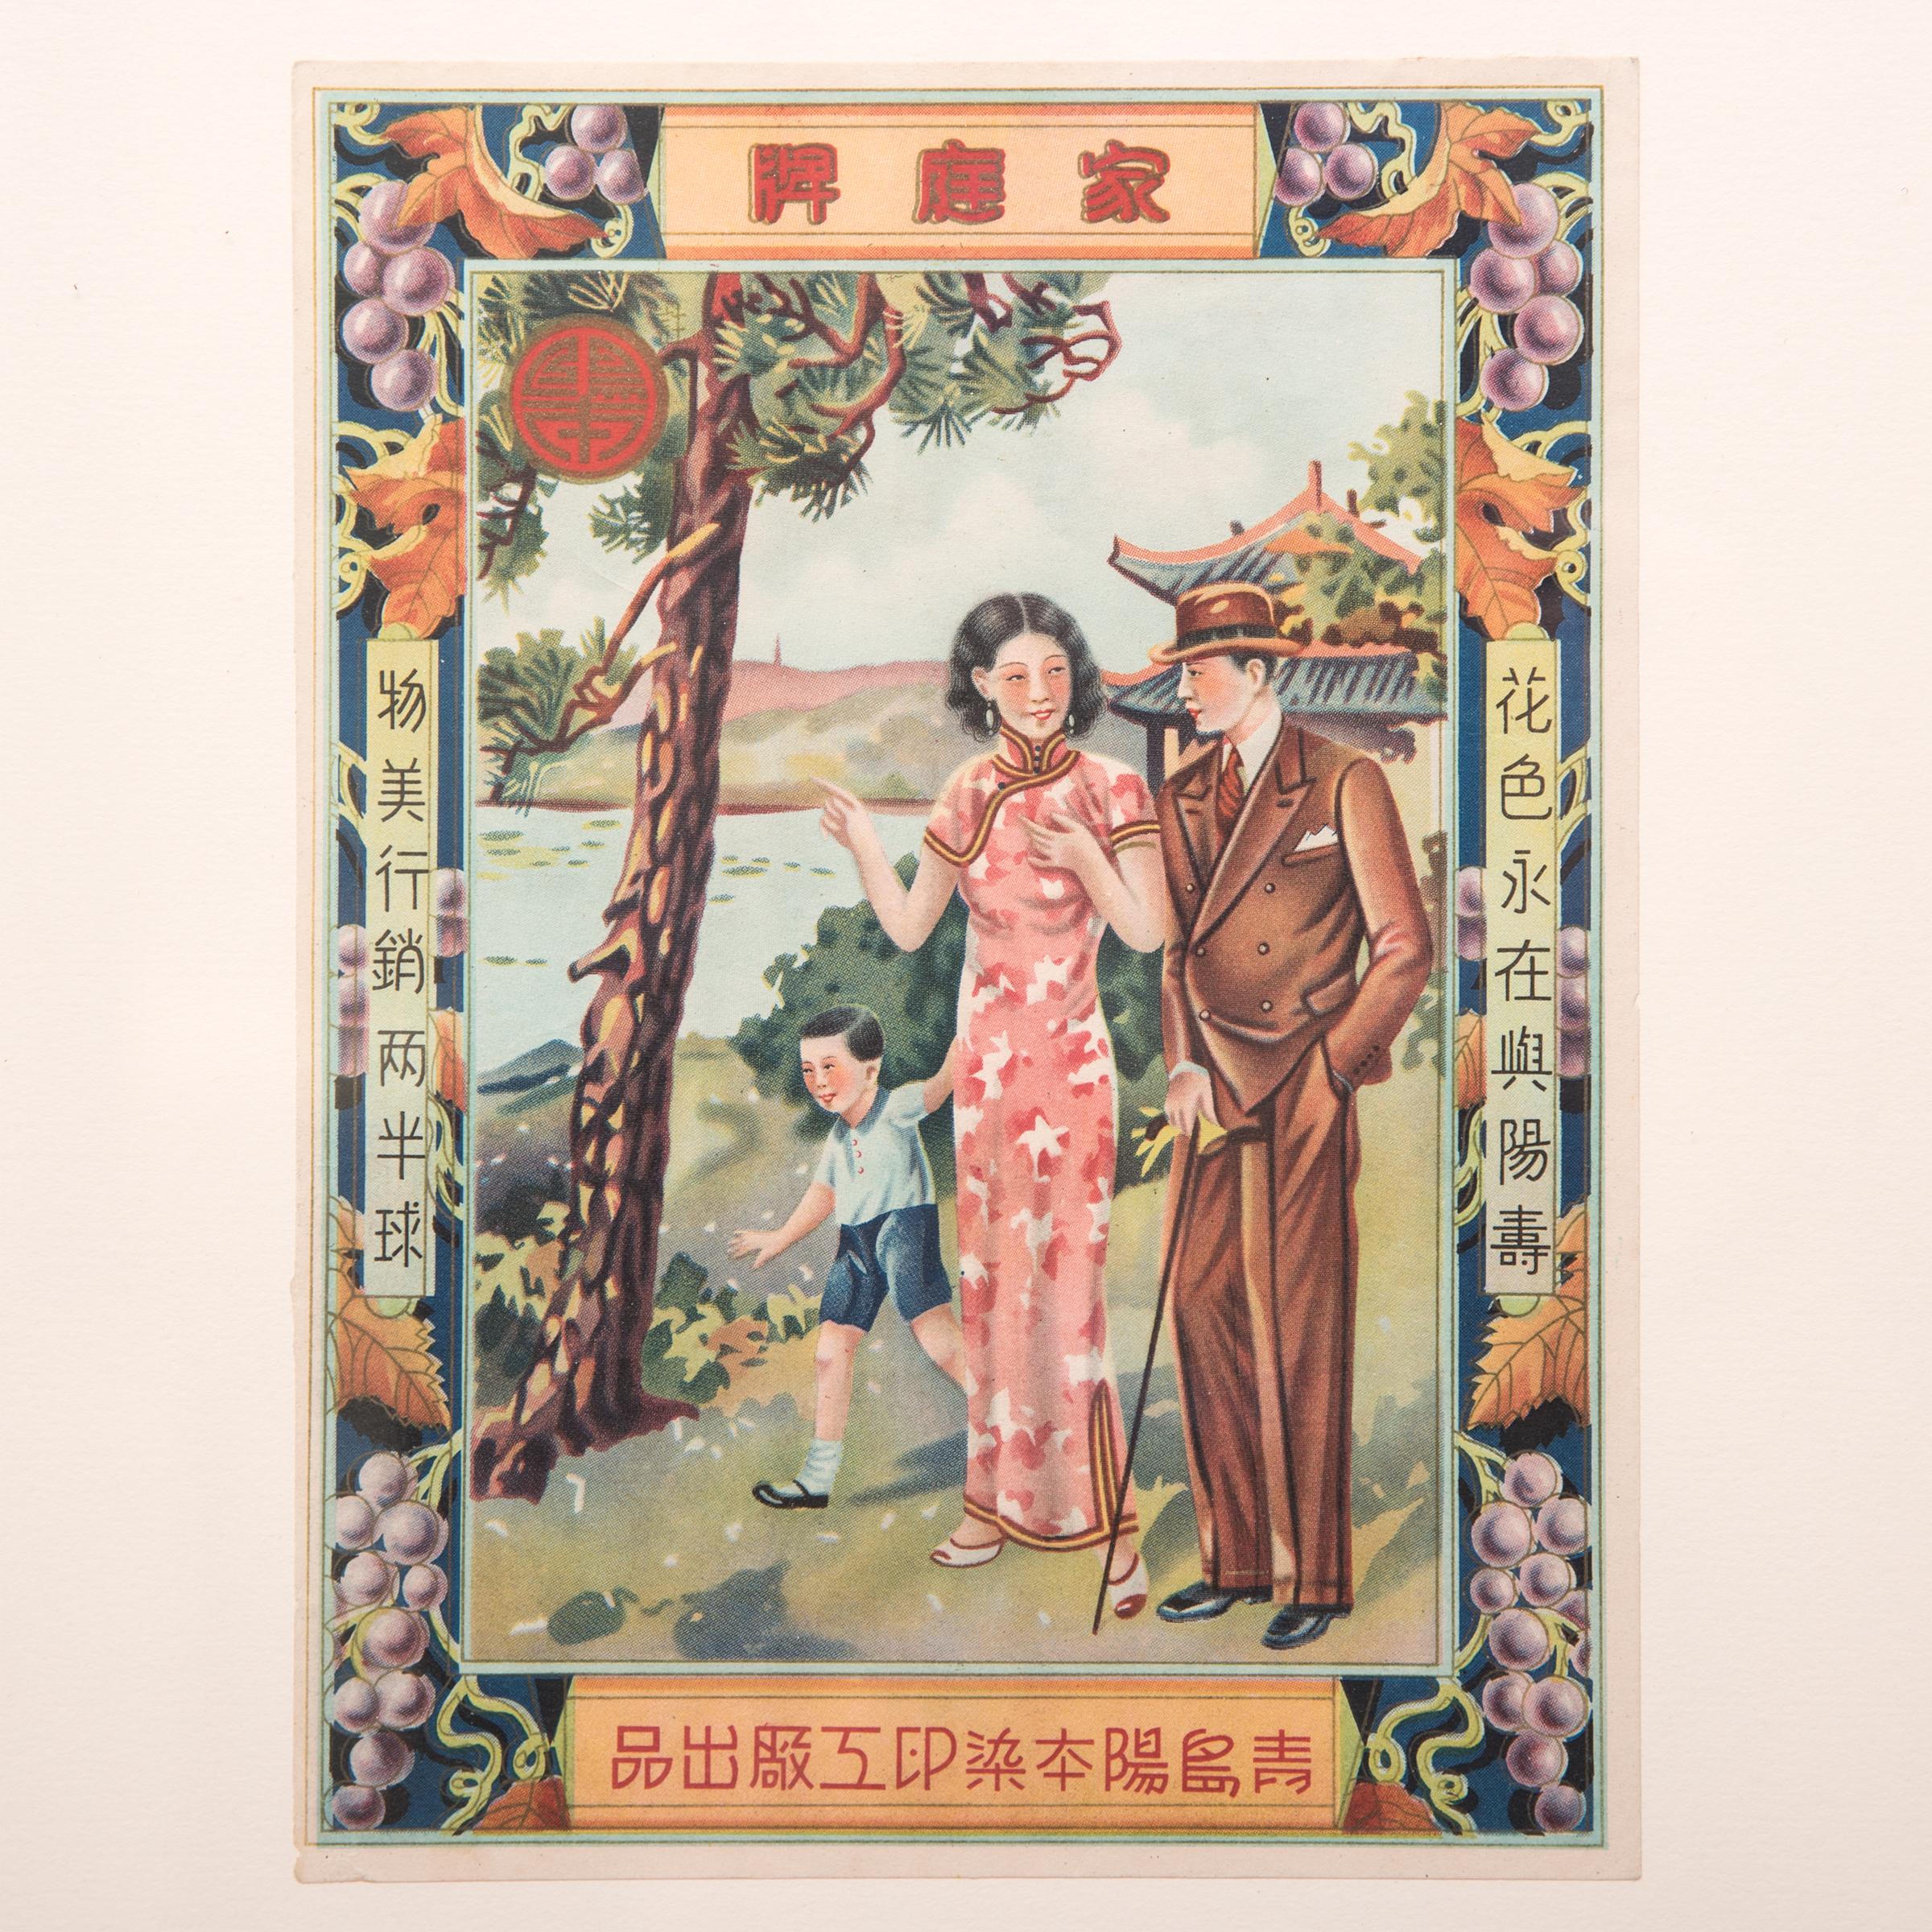 Mixing Western and traditional pictorial styles, this vintage ad depicts a young family on a garden stroll. A cheongsam-clad woman nods to tradition in contrast to her Western-garbed family: a son in shorts and a dapper husband in suit, hat, and